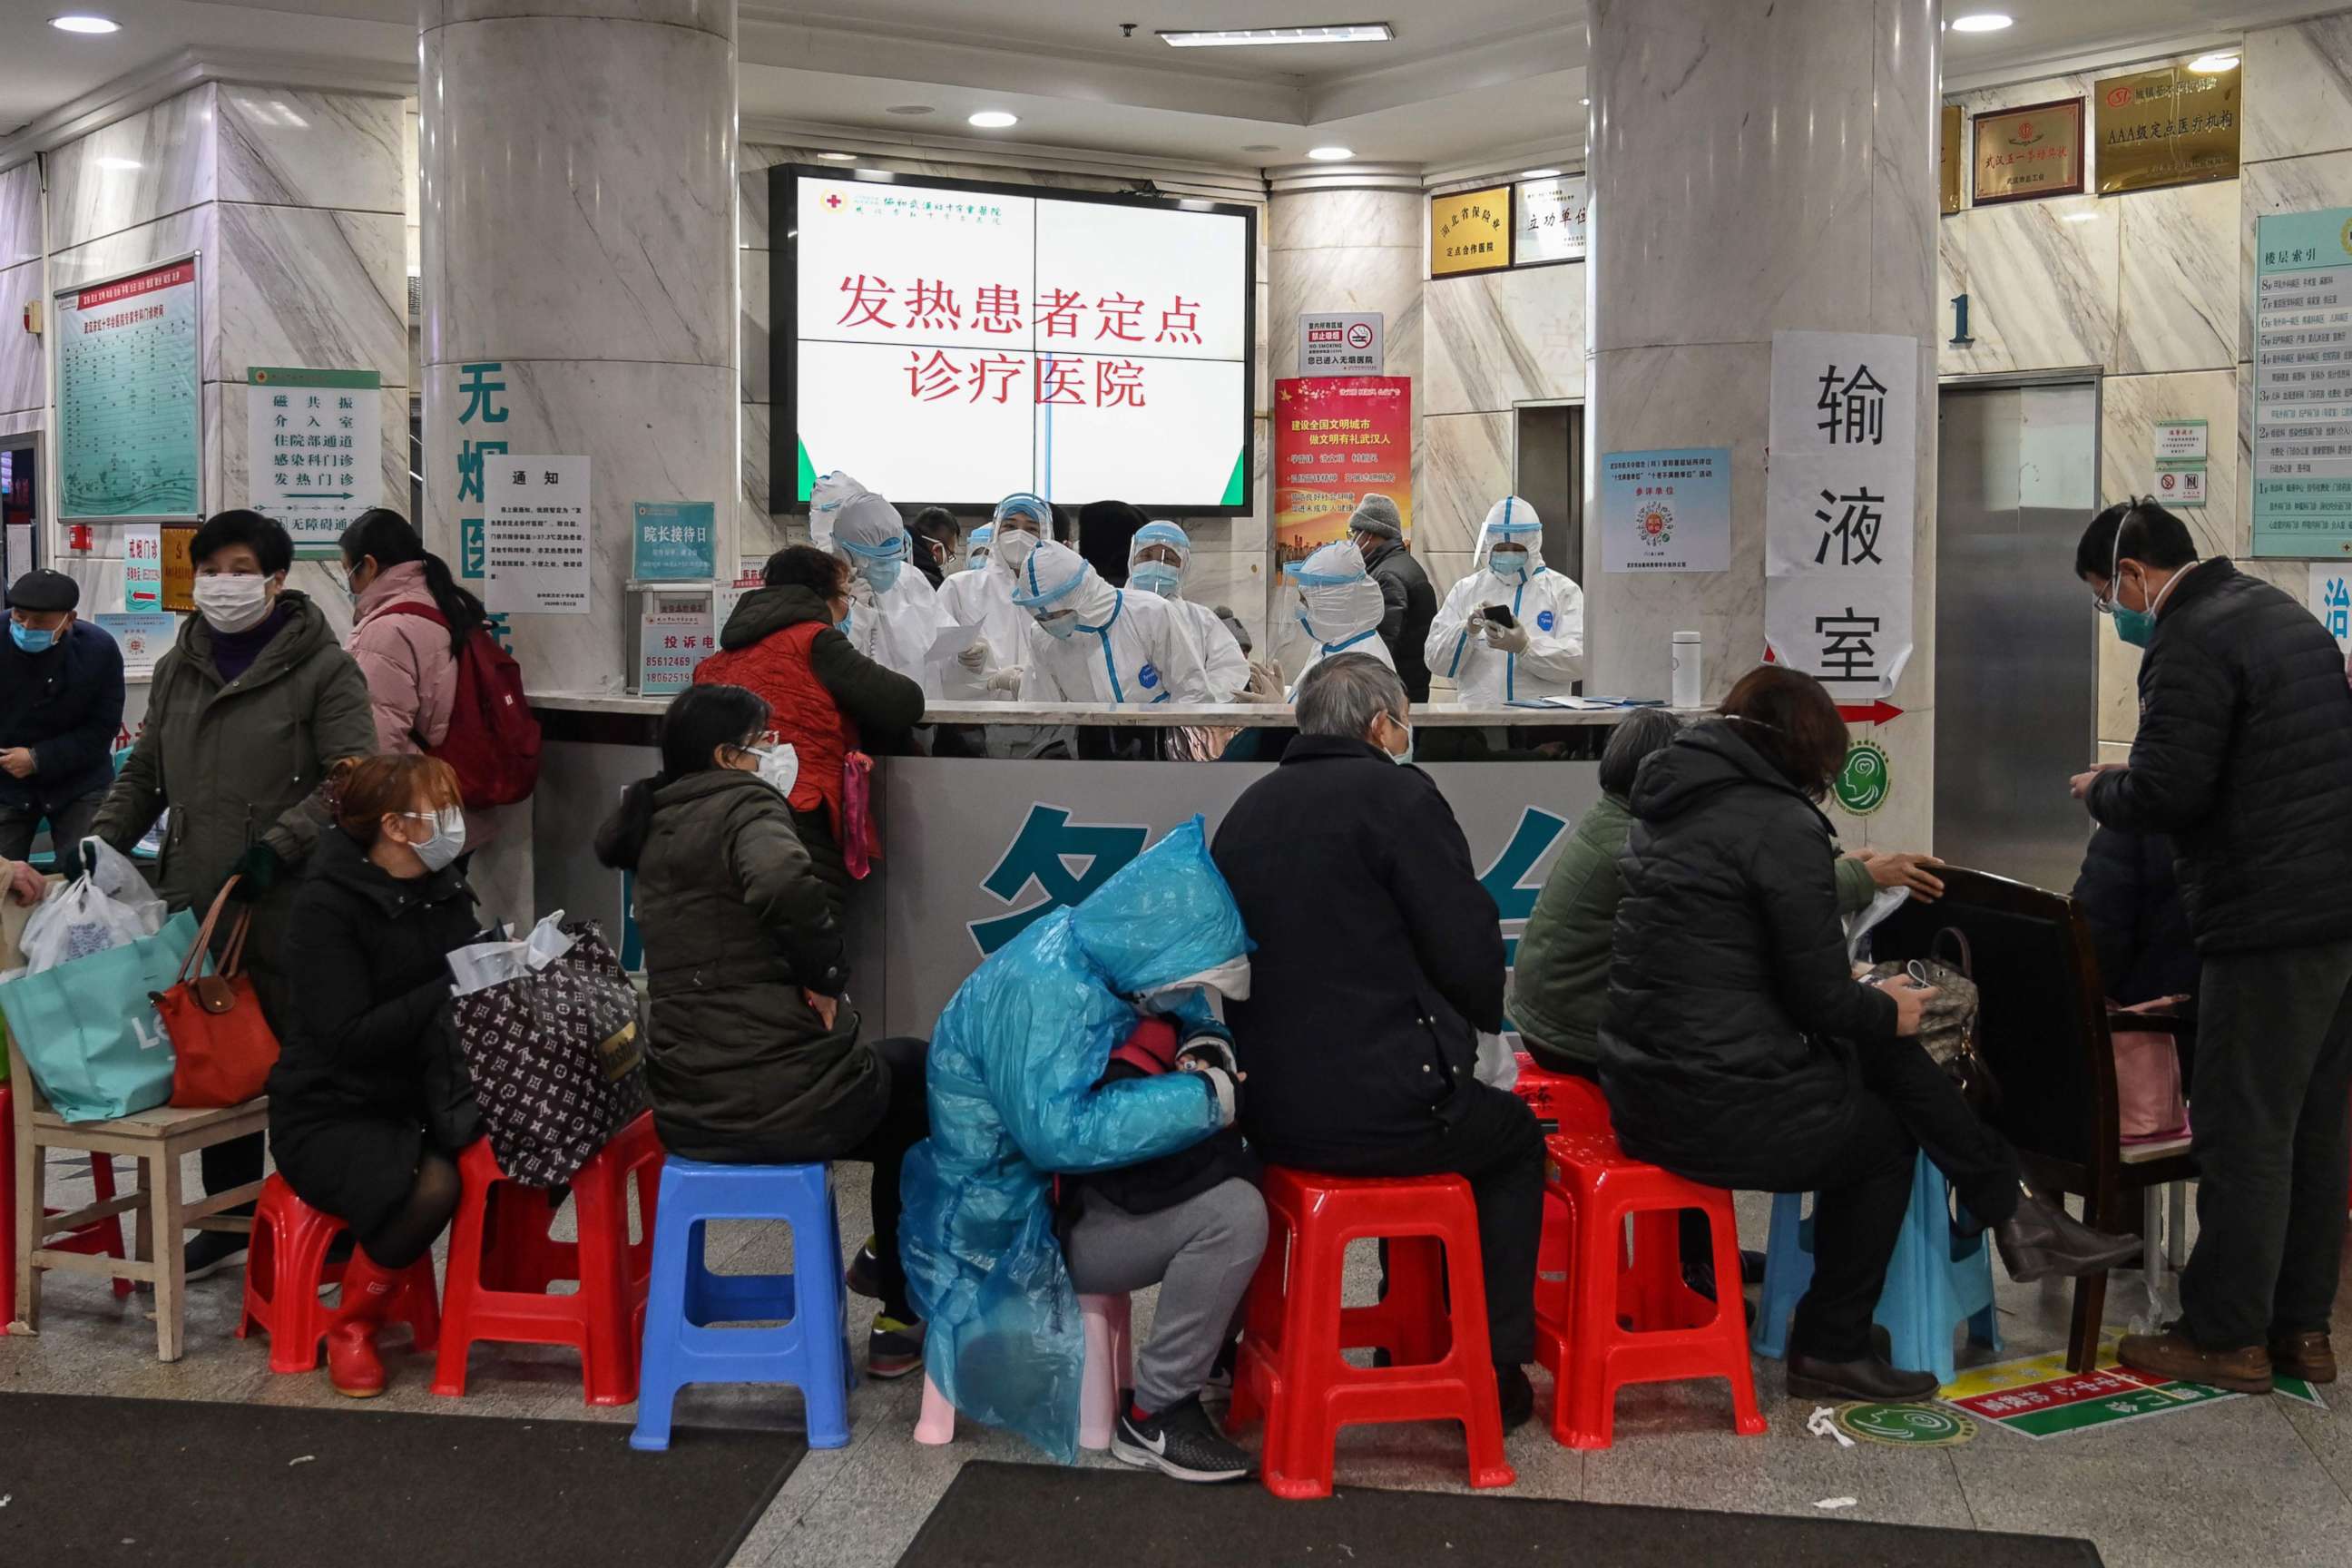 PHOTO: Medical staff in protective clothing help people who are waiting to be seen at the Wuhan Red Cross Hospital in Wuhan, China, Jan. 24, 2020.